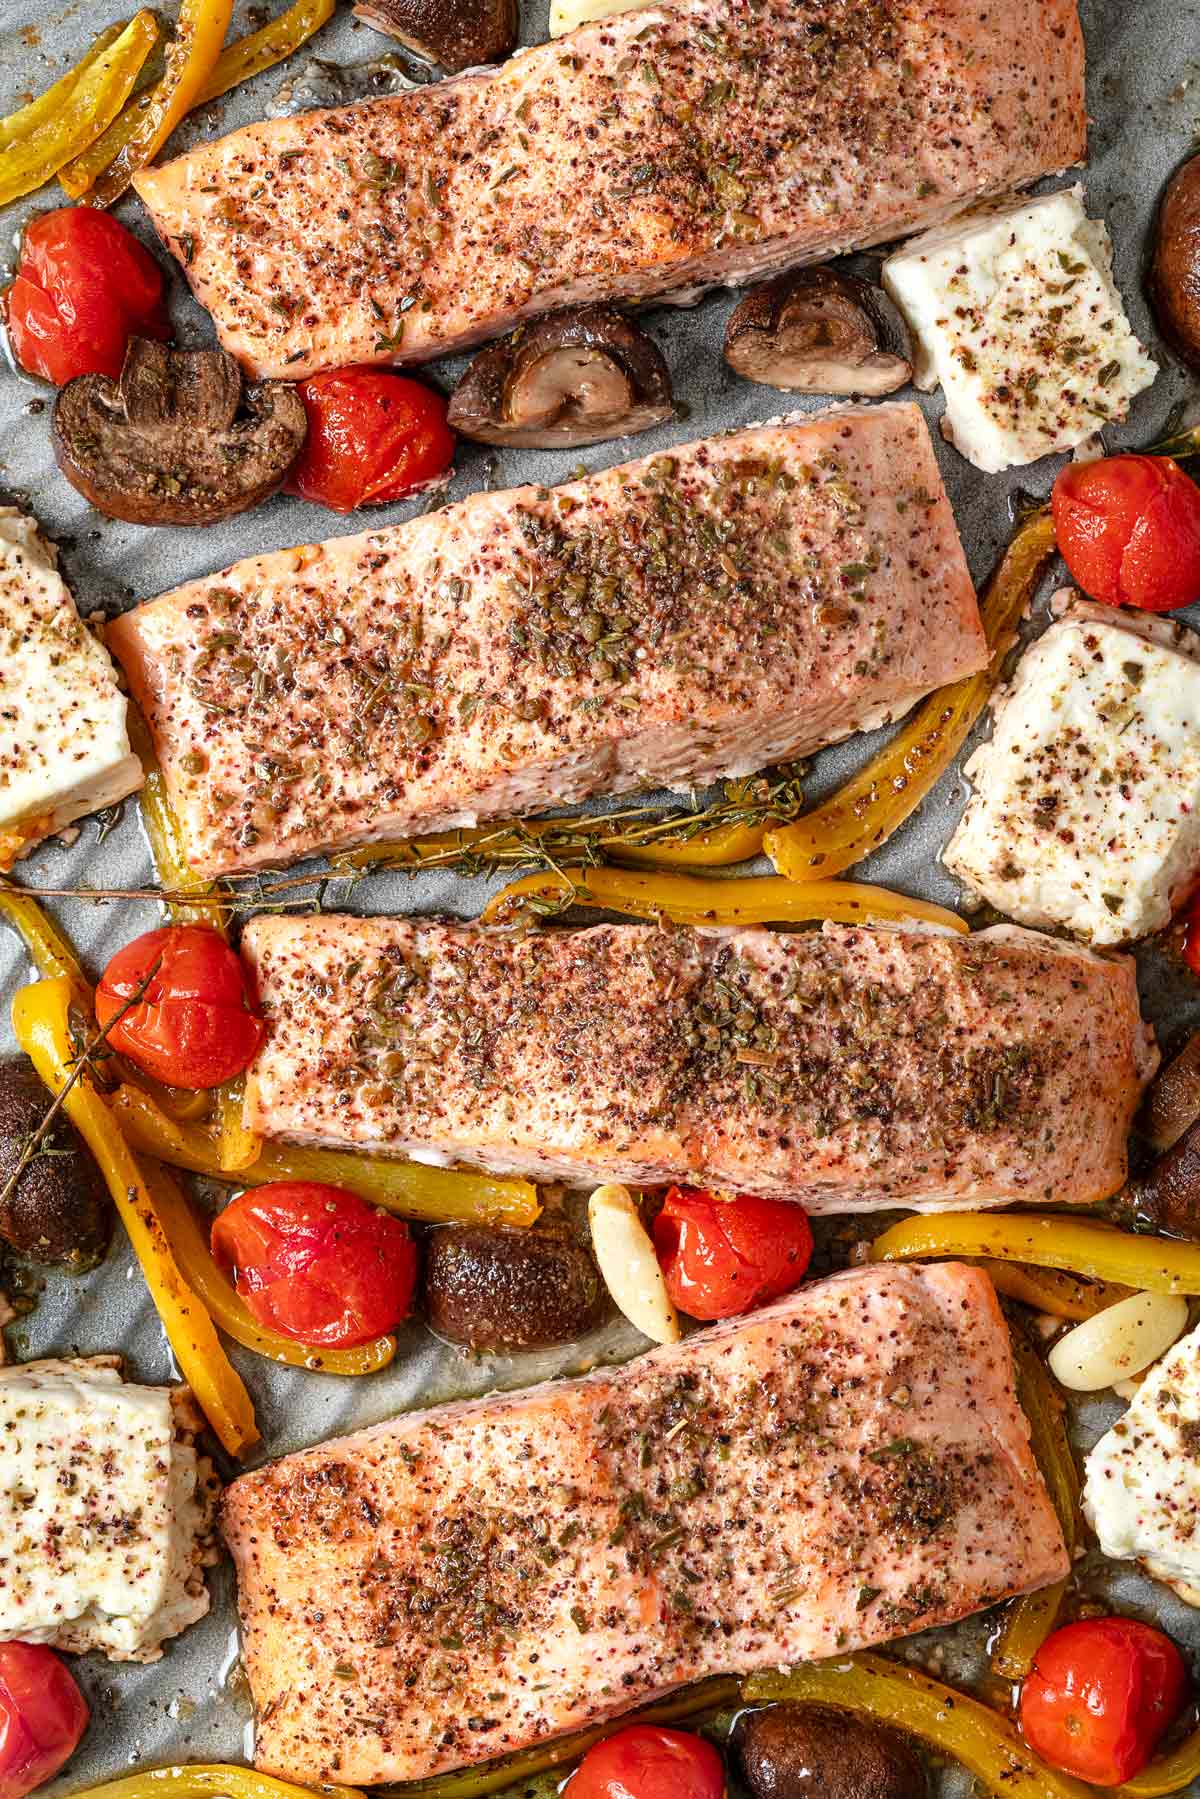 a close up of cooked baked salmon fillets with vegetables and feta on a sheet pan.